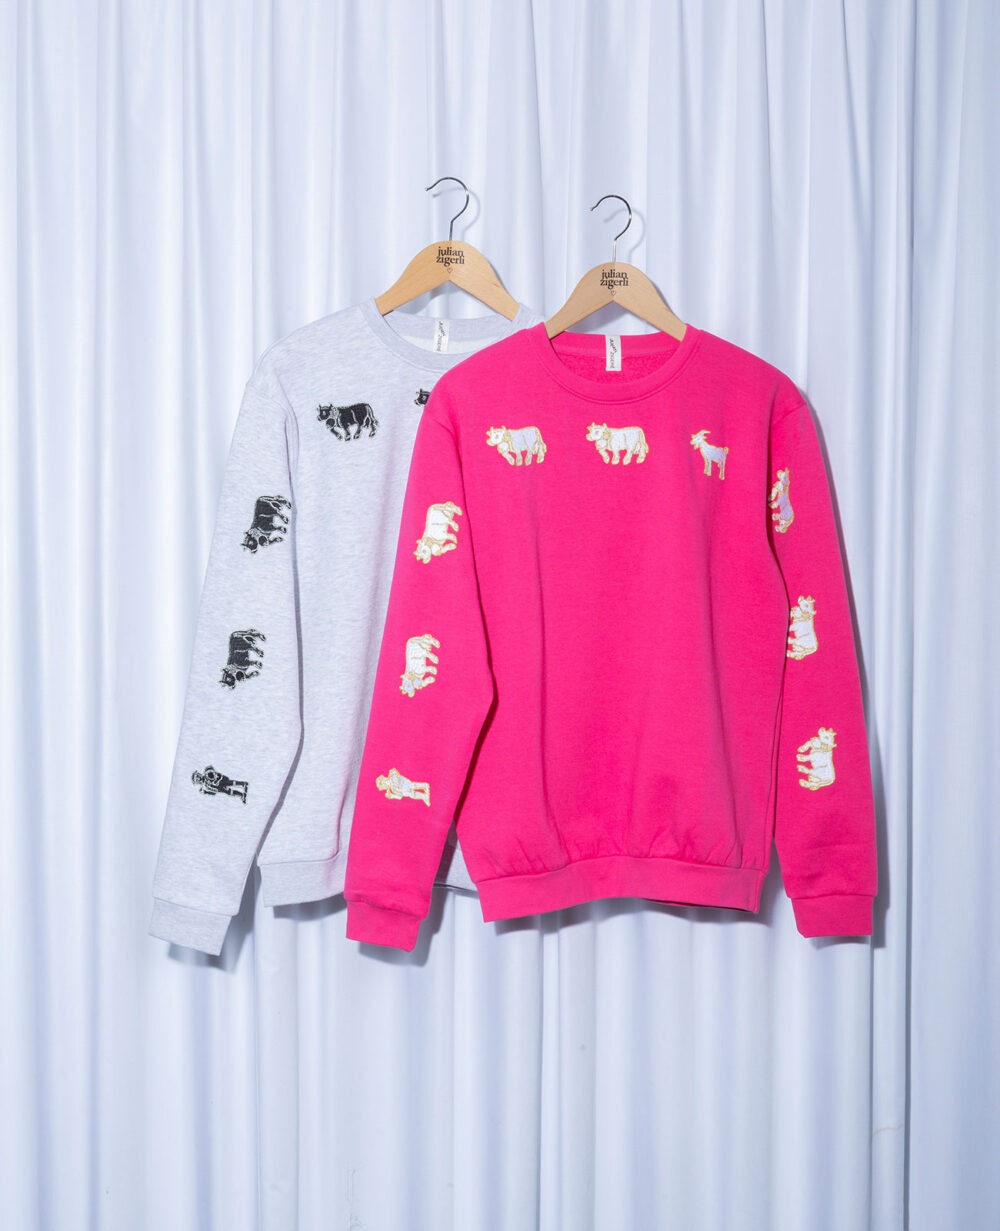 Appenzeller Sweater grey and pink | Collab with Julian Zigerli